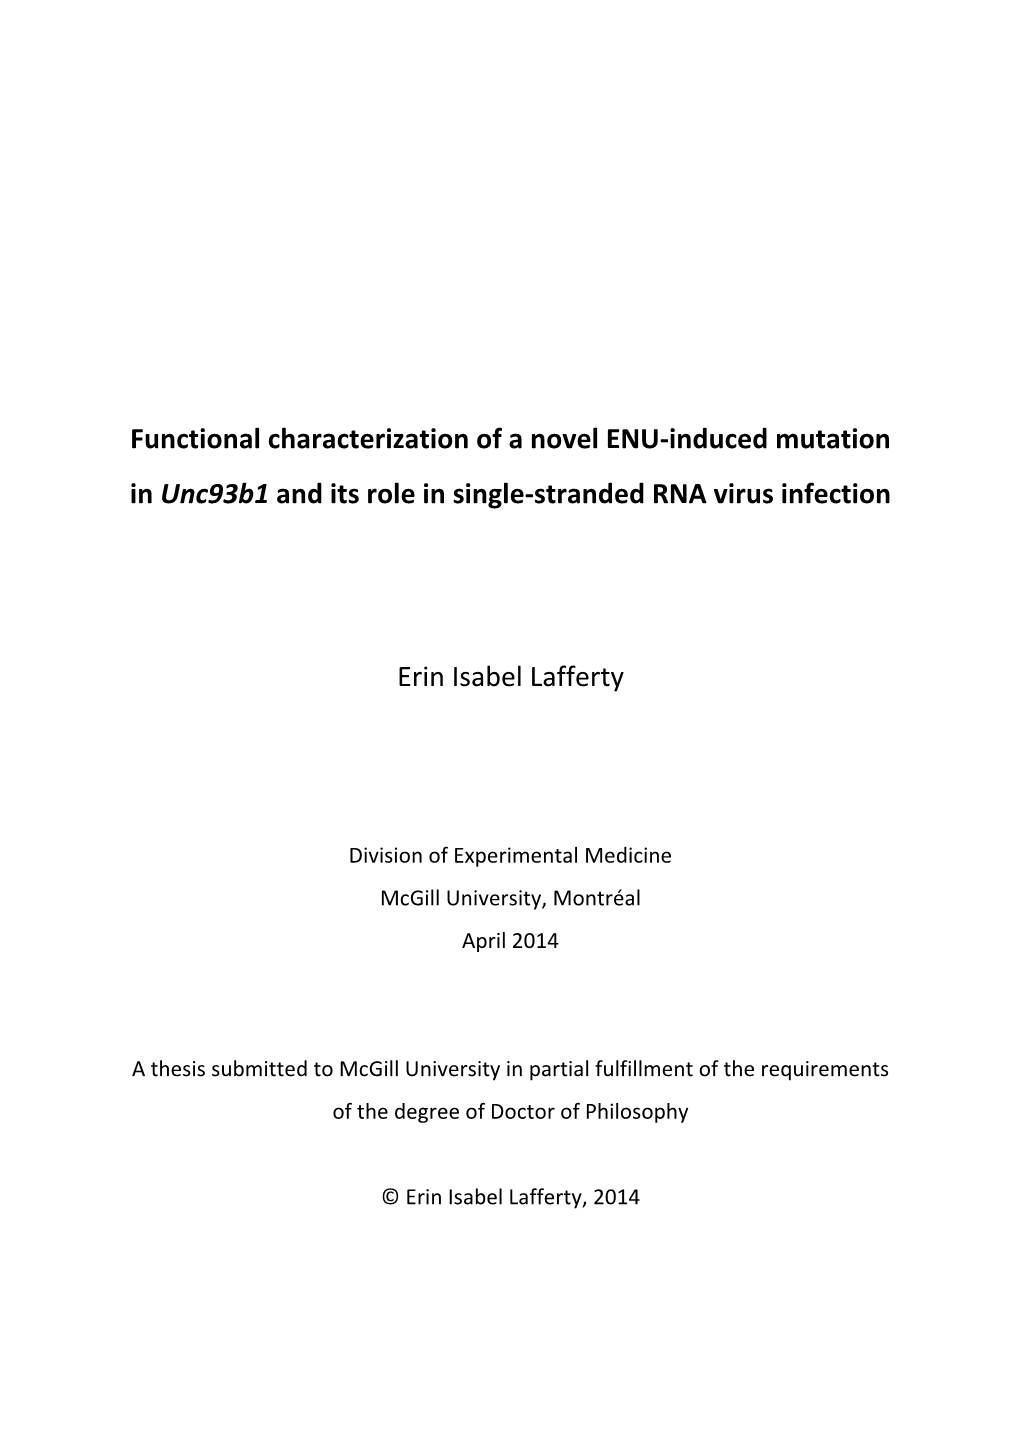 Functional Characterization of a Novel ENU-Induced Mutation In